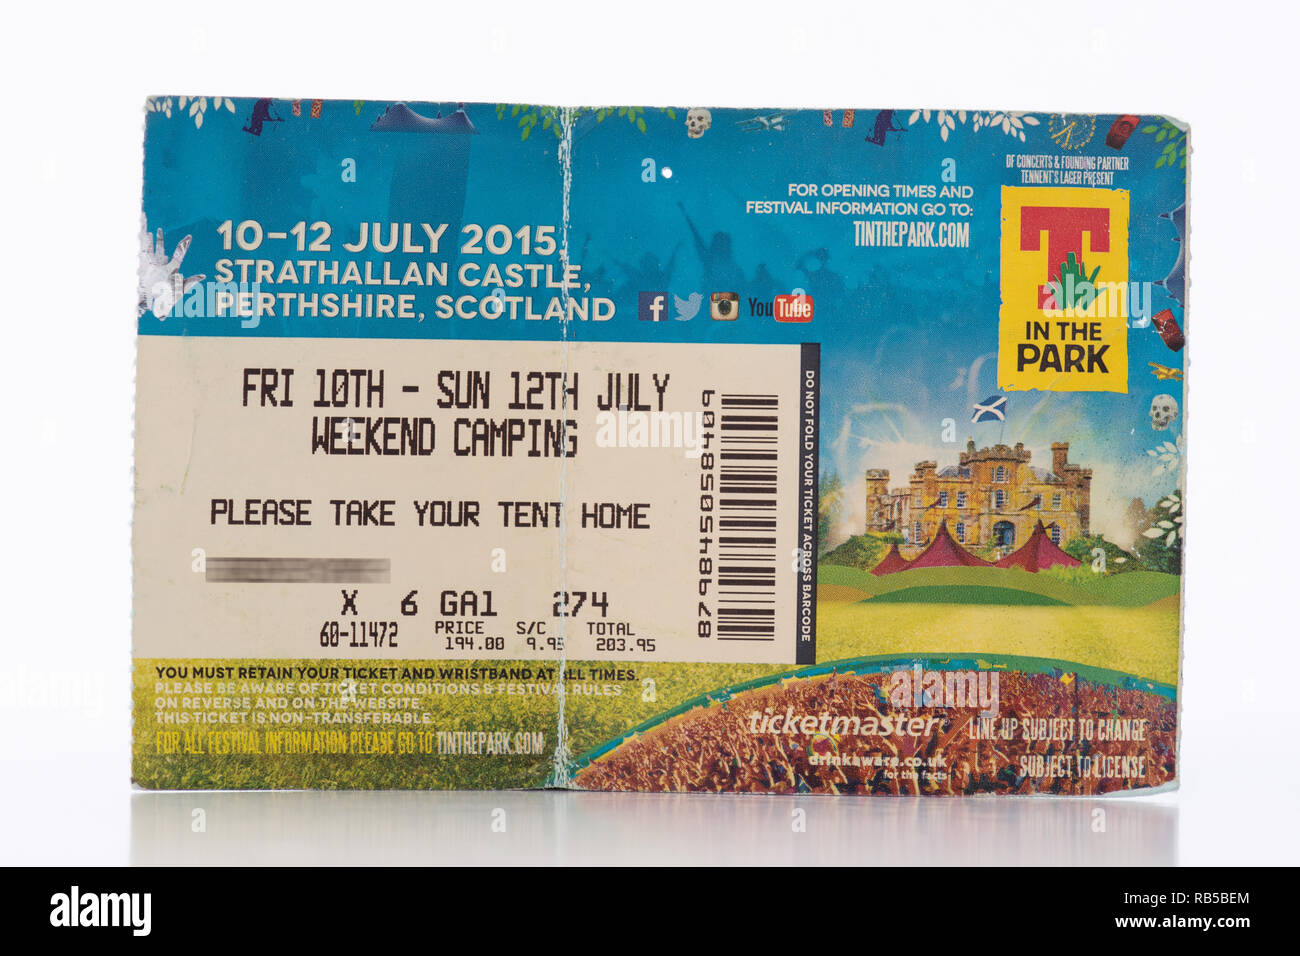 T in the Park ticket 2015 Strathallan Castle, Scotland, UK (ticket holders name obscured for privacy) - Scottish music festival Stock Photo